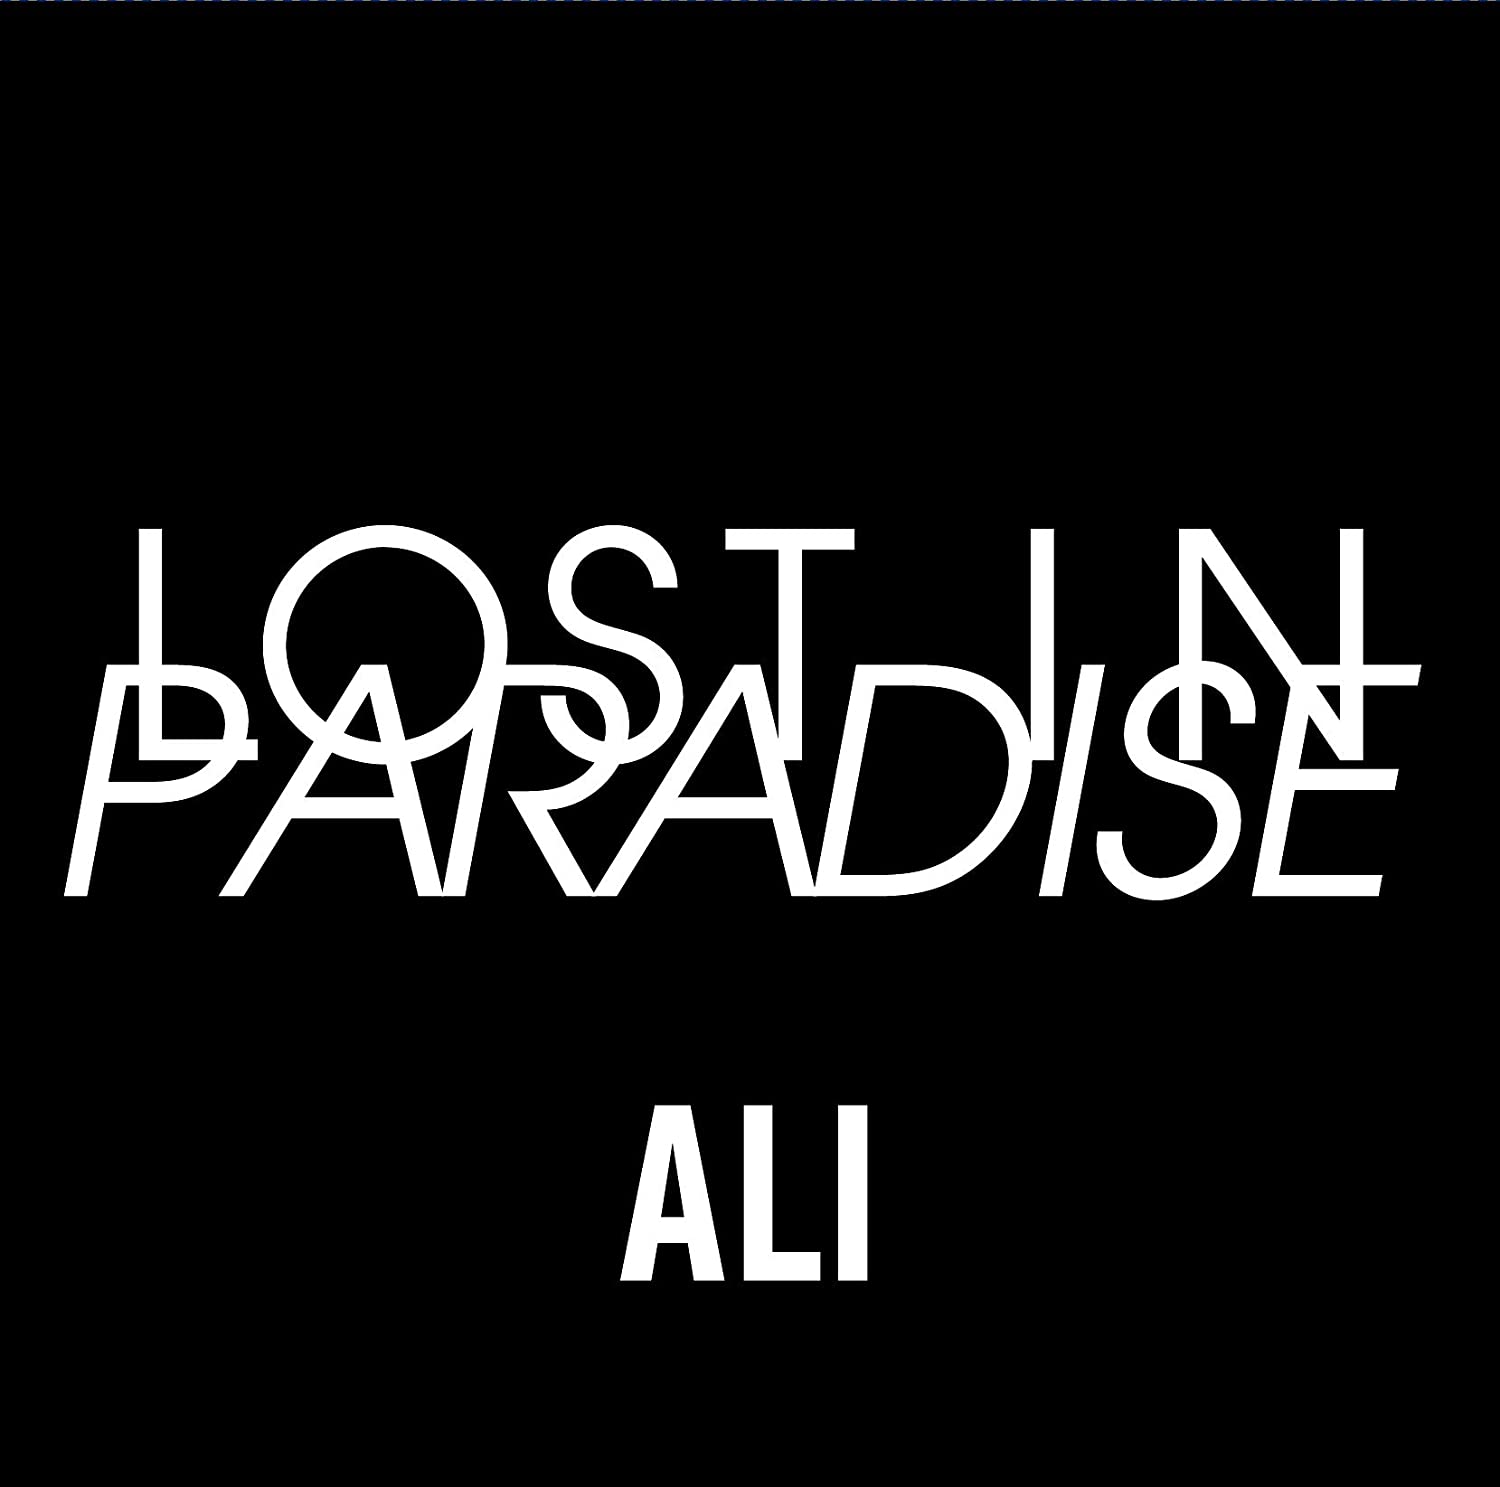 LOST IN PARADISE feat. AKLO (通常盤)